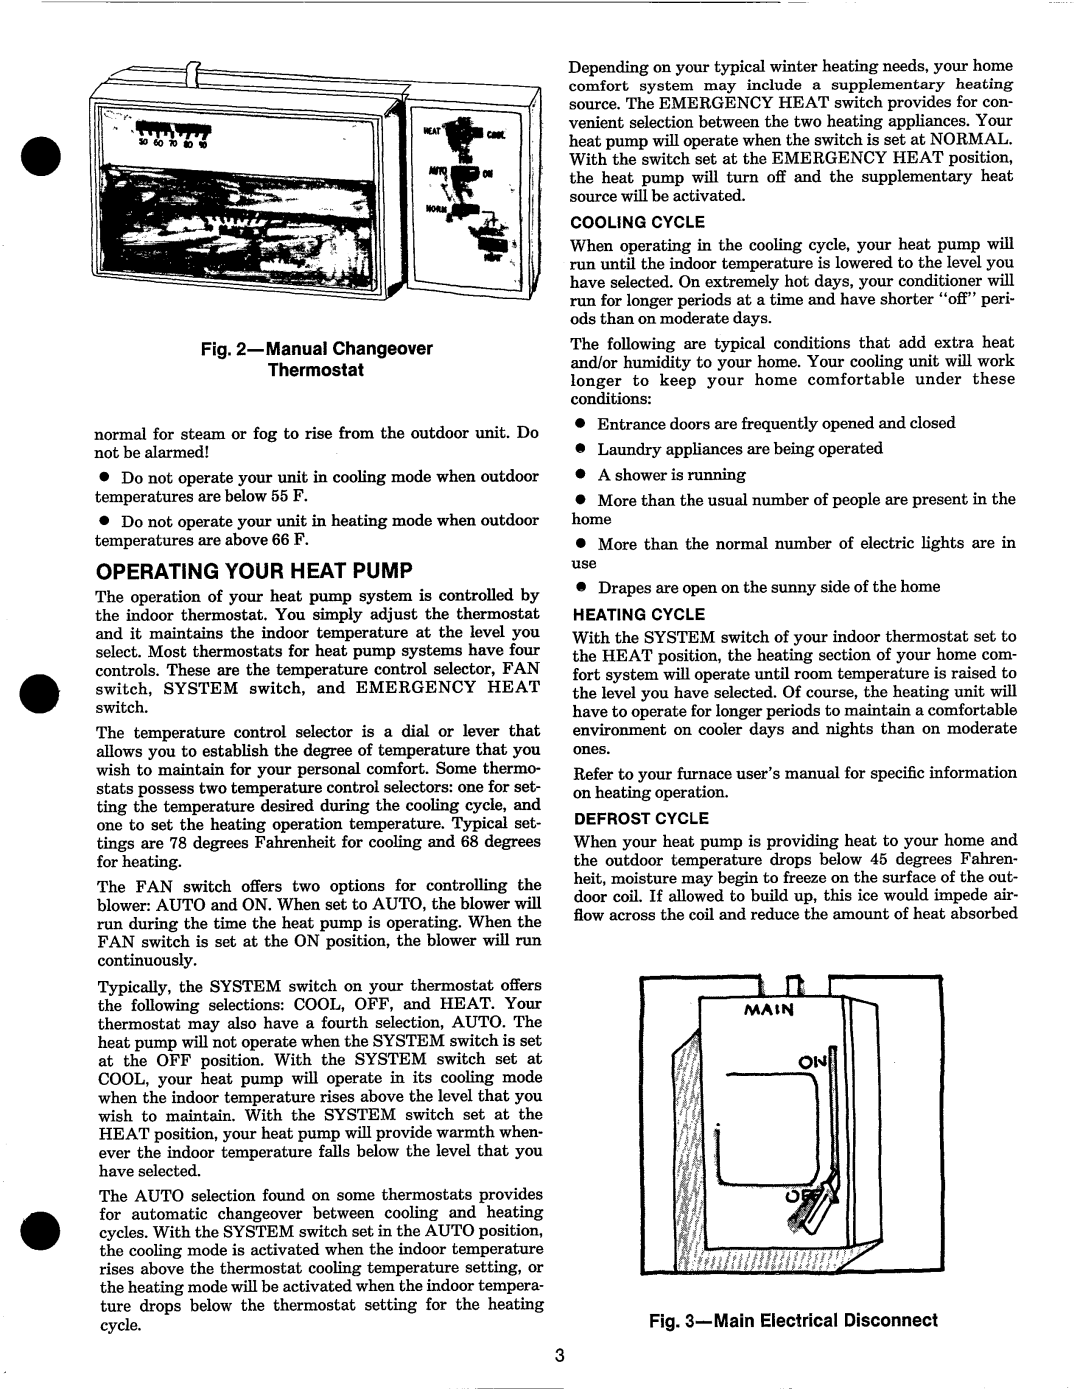 Carrier 2000 manual 